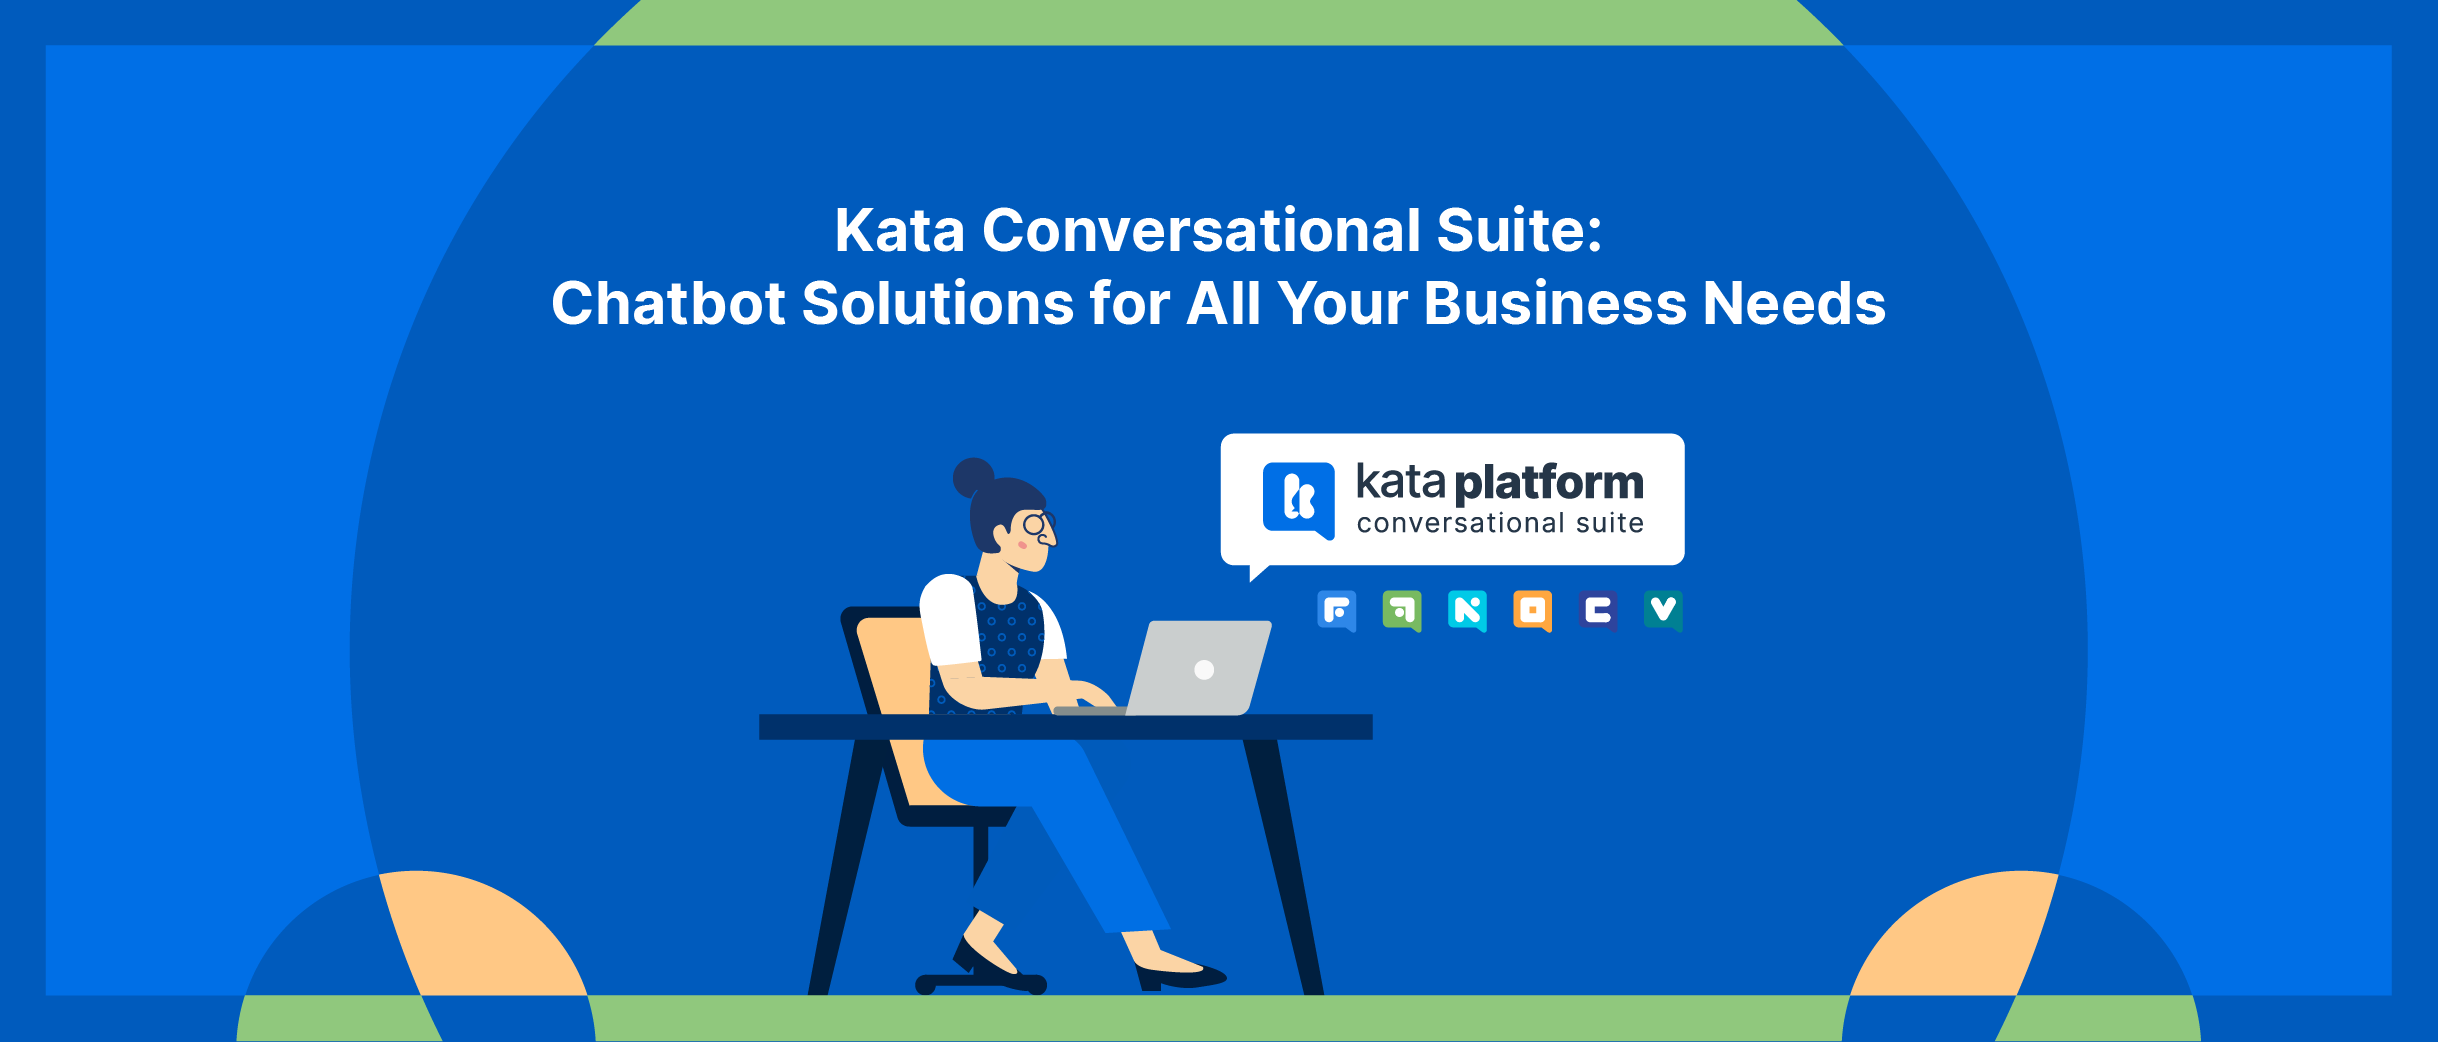 Kata Conversational Suite: Chatbot Solutions for Your Business Needs